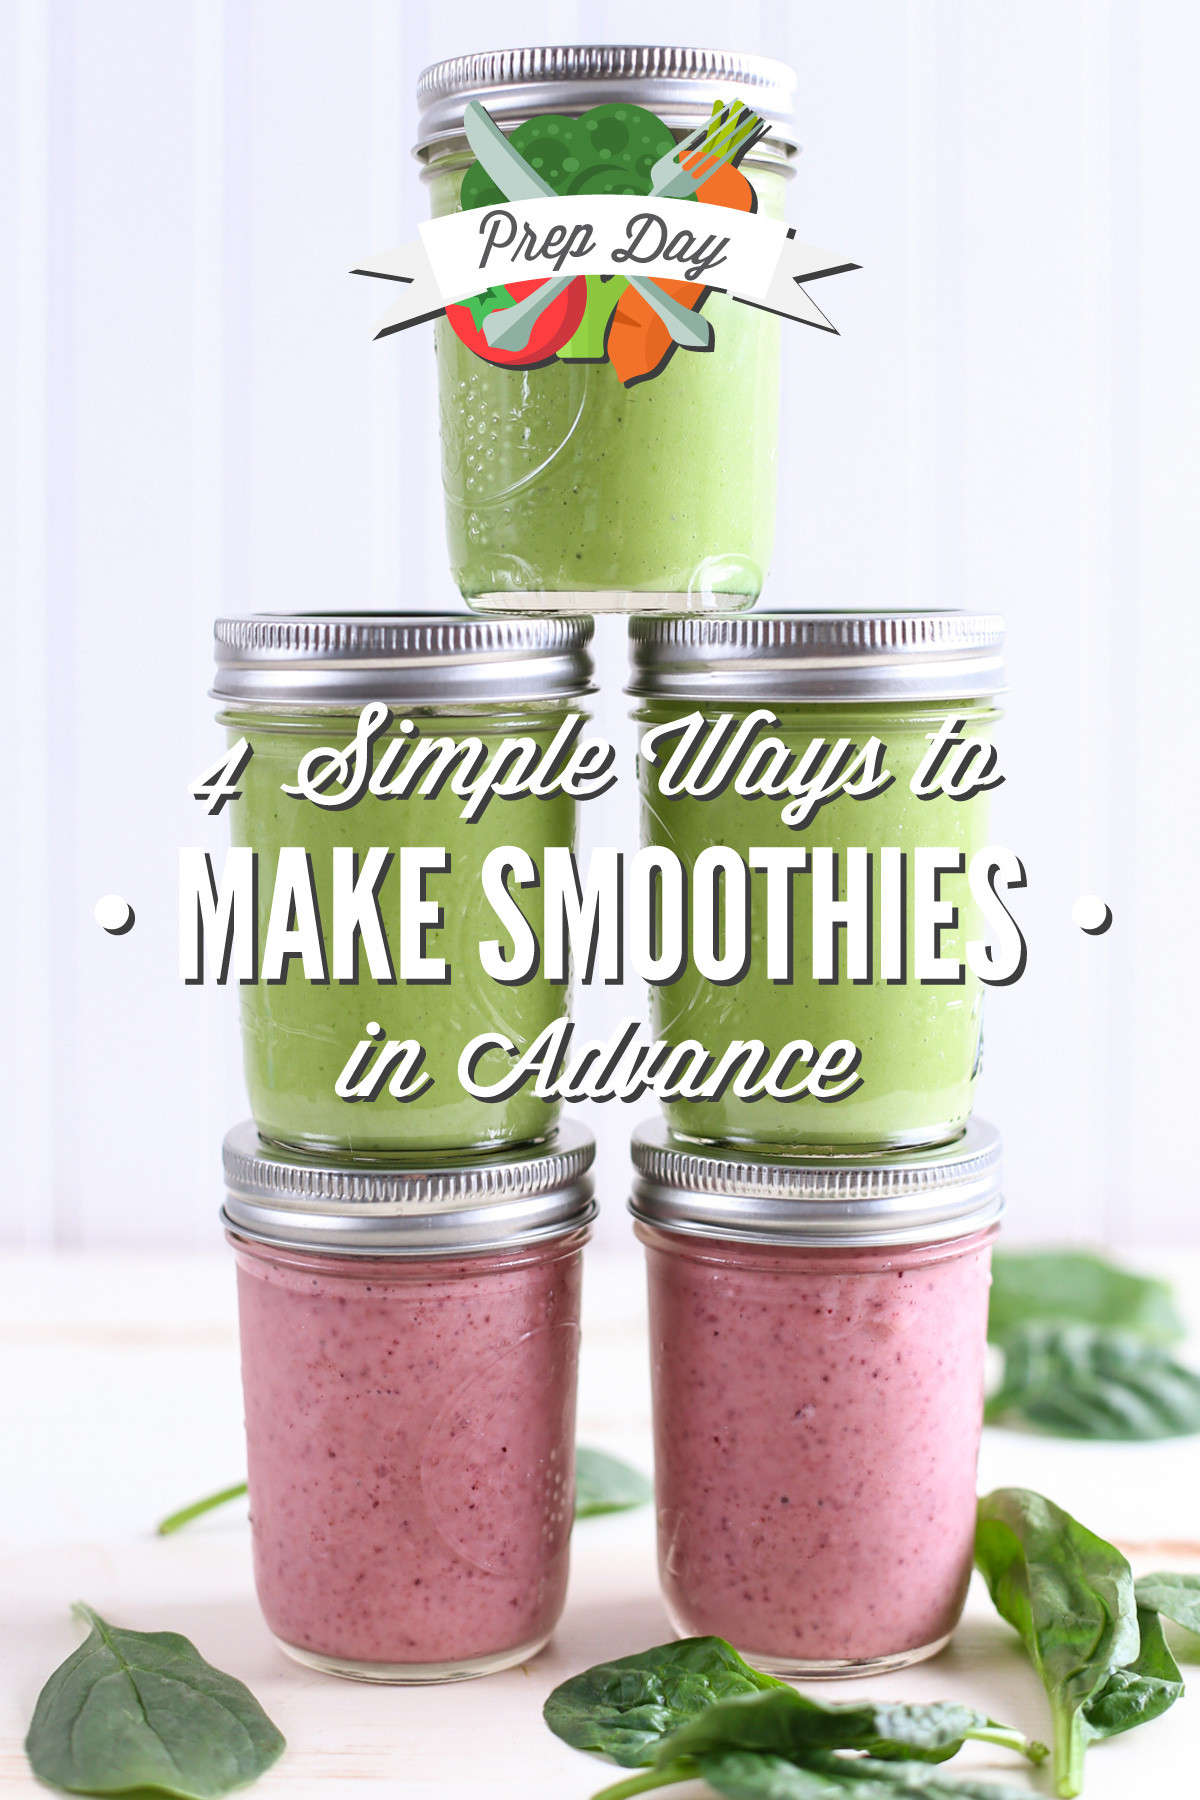 Can You Freeze Smoothies
 Prep Day 4 Simple Ways to Make Smoothies in Advance